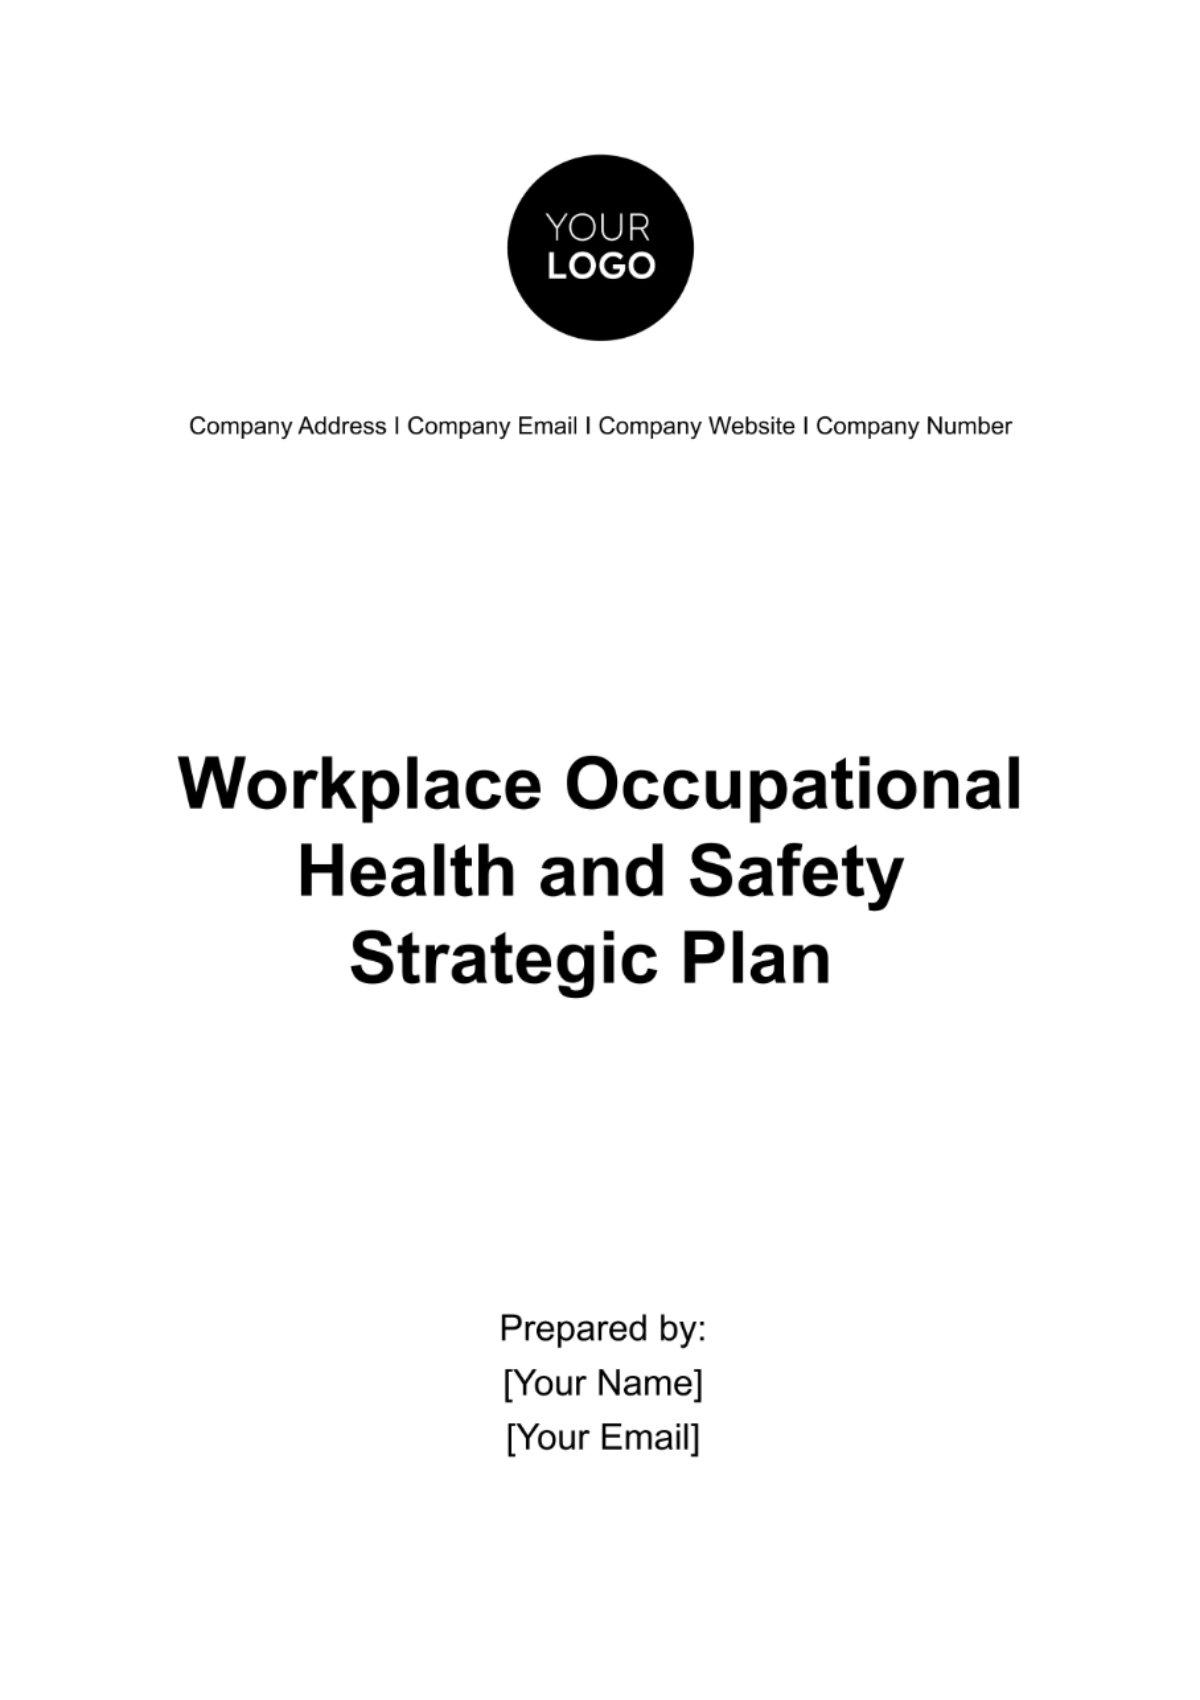 Free Workplace Occupational Health and Safety Strategic Plan Template